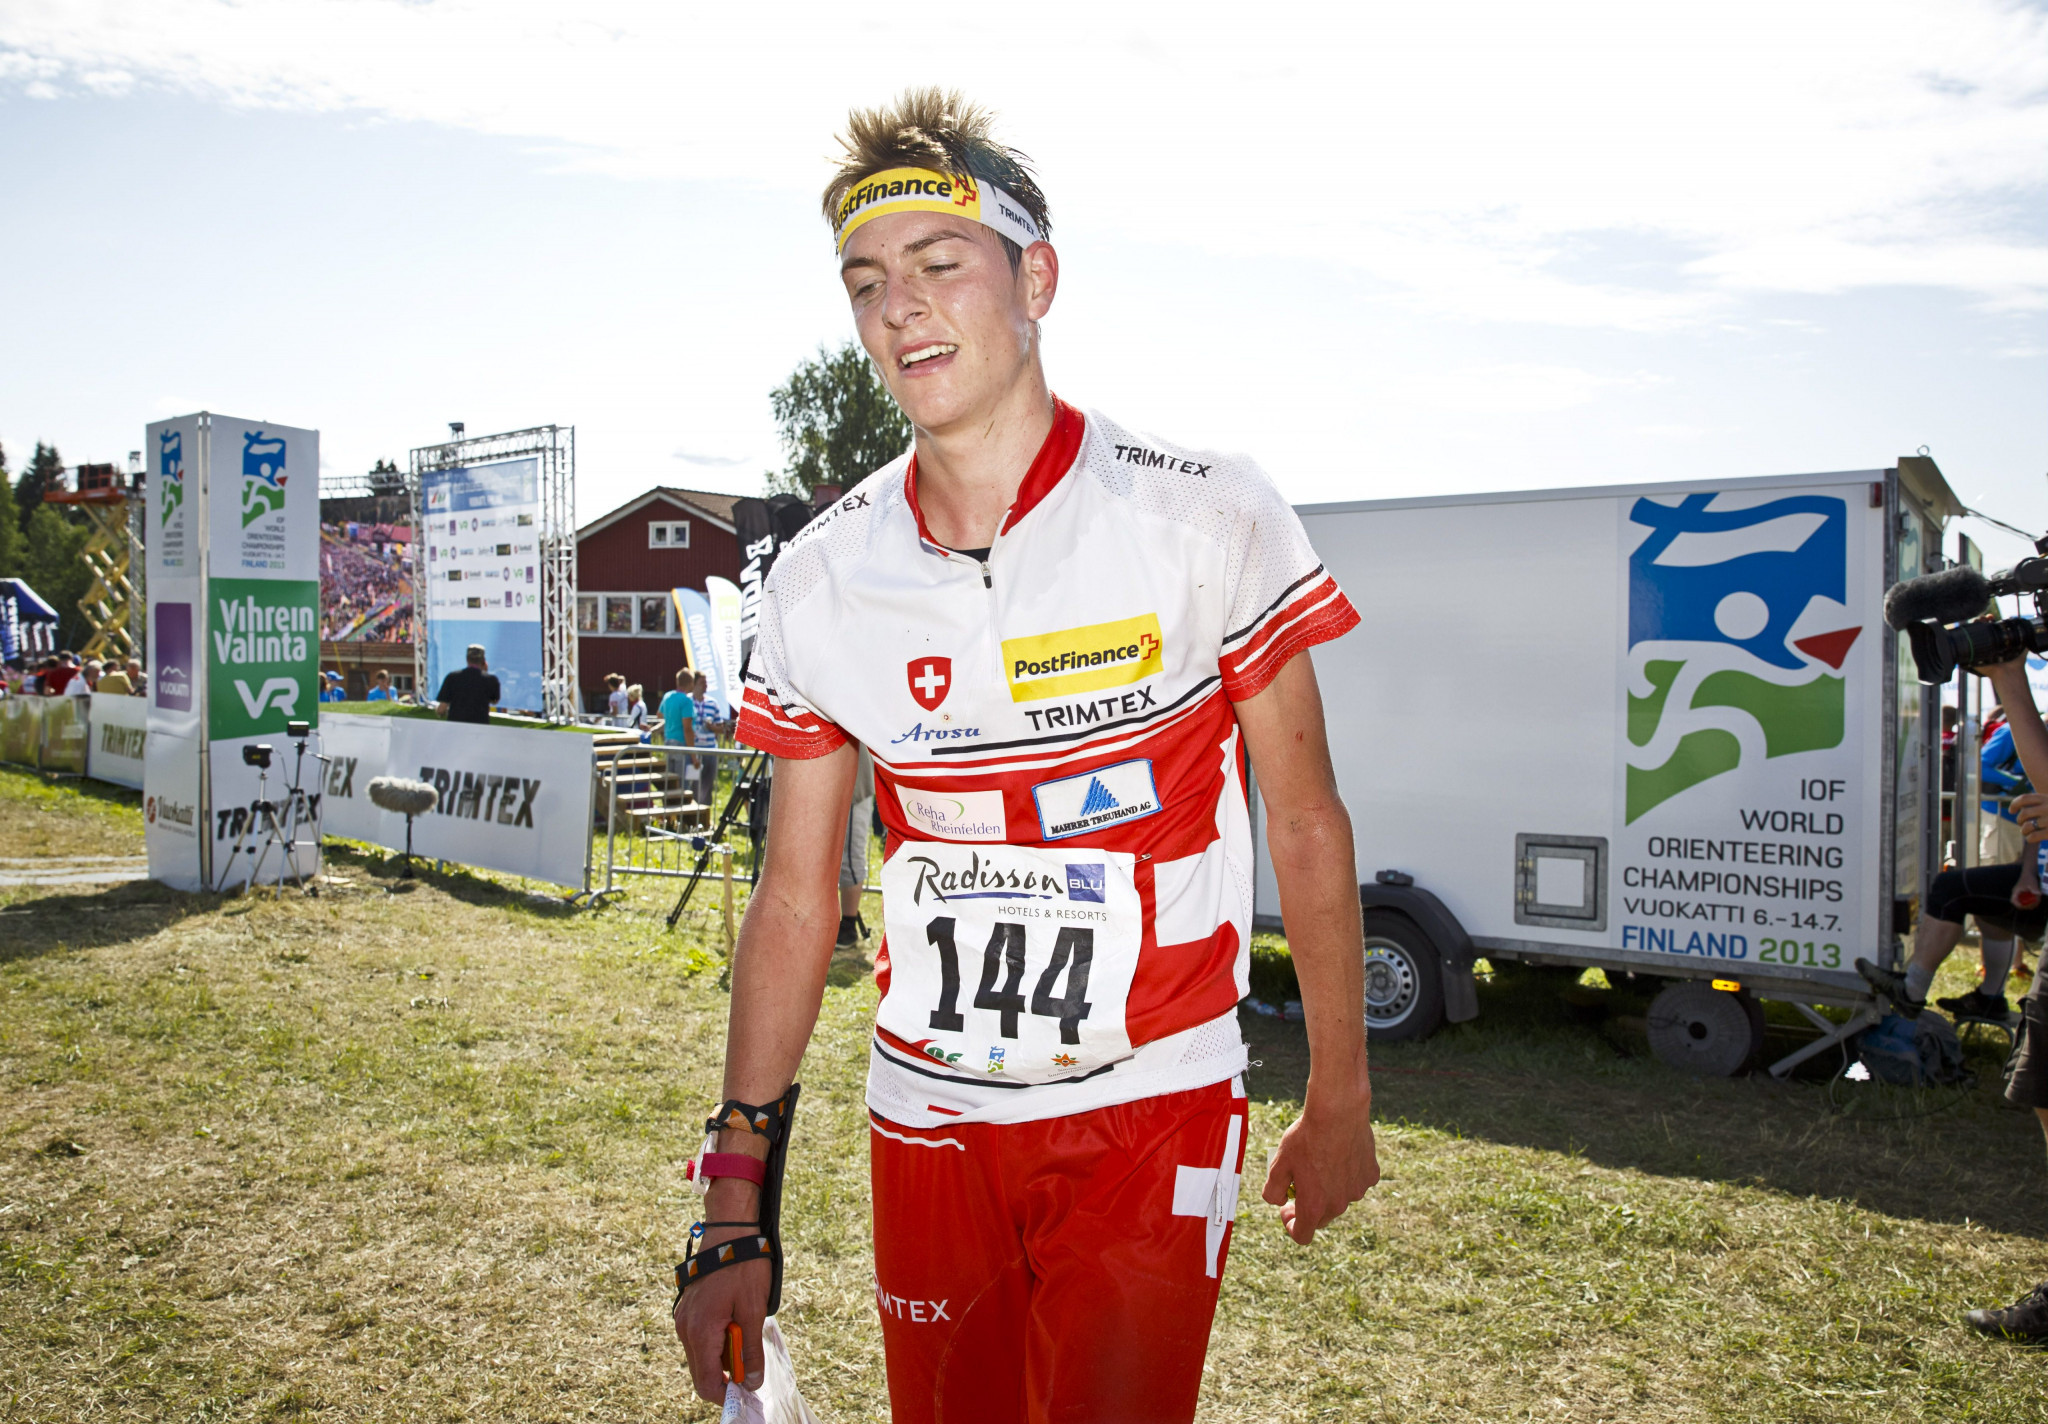 Matthias Kyburz won two individual gold medals at the European Orienteering Championships in Verona ©Getty Images